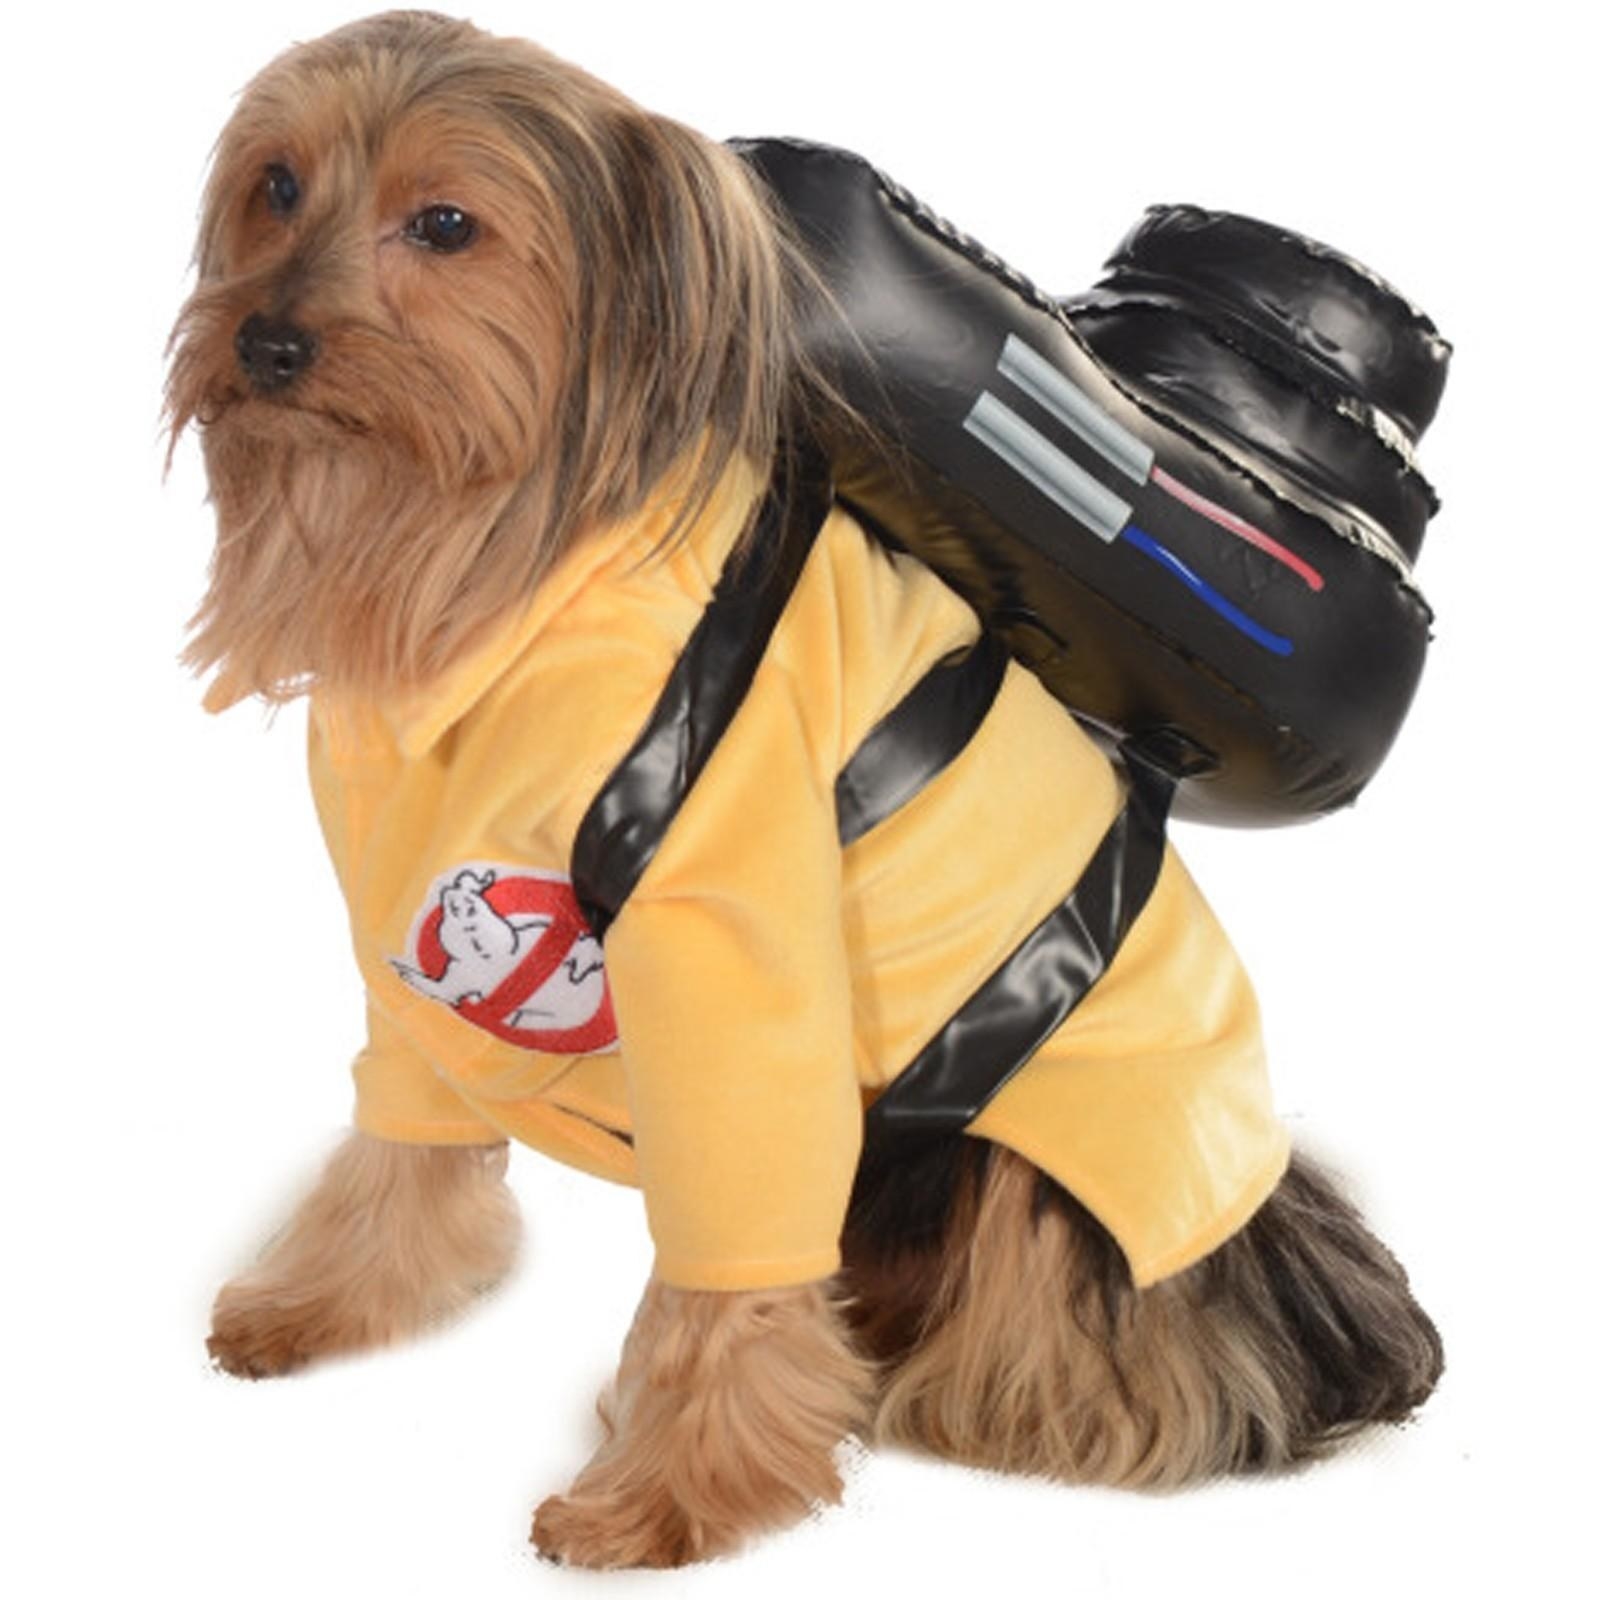 dog wearing the Ghostbusters costume